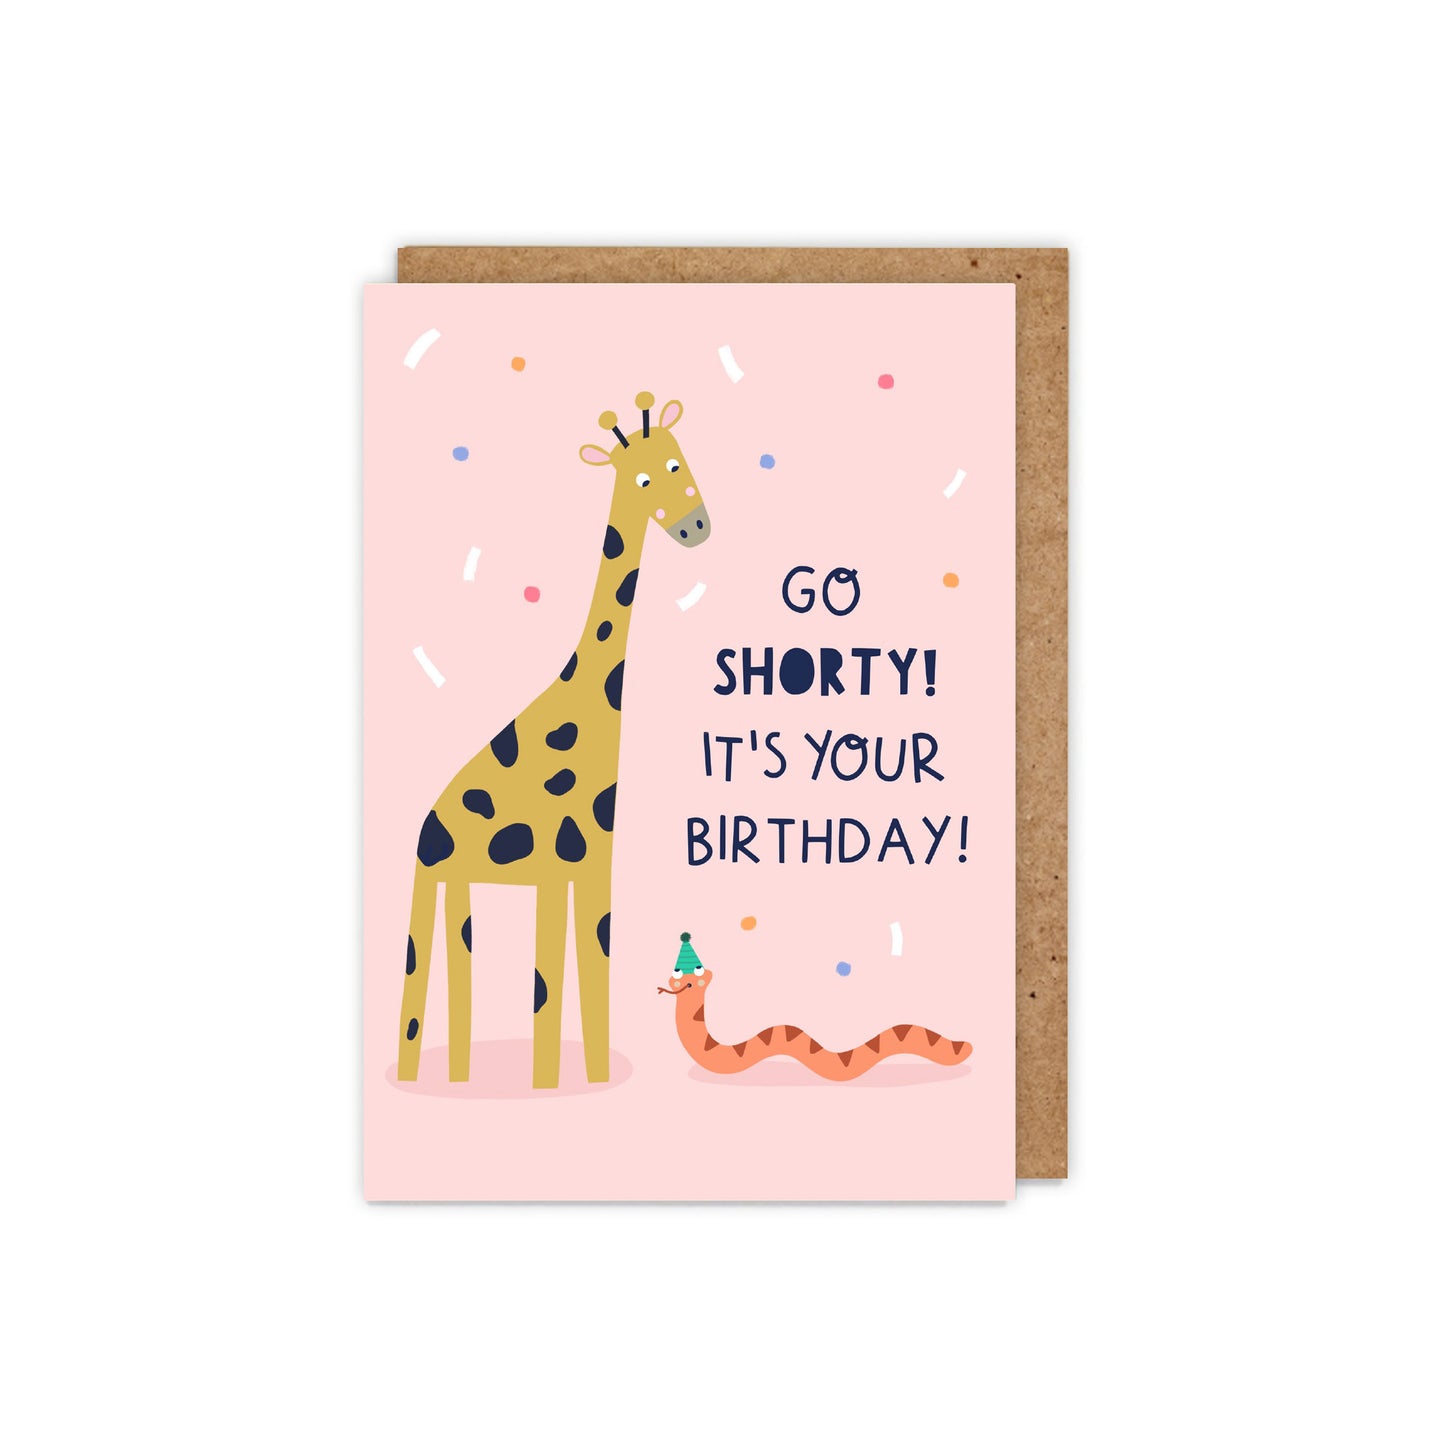 Go Shorty! It's Your Birthday Card